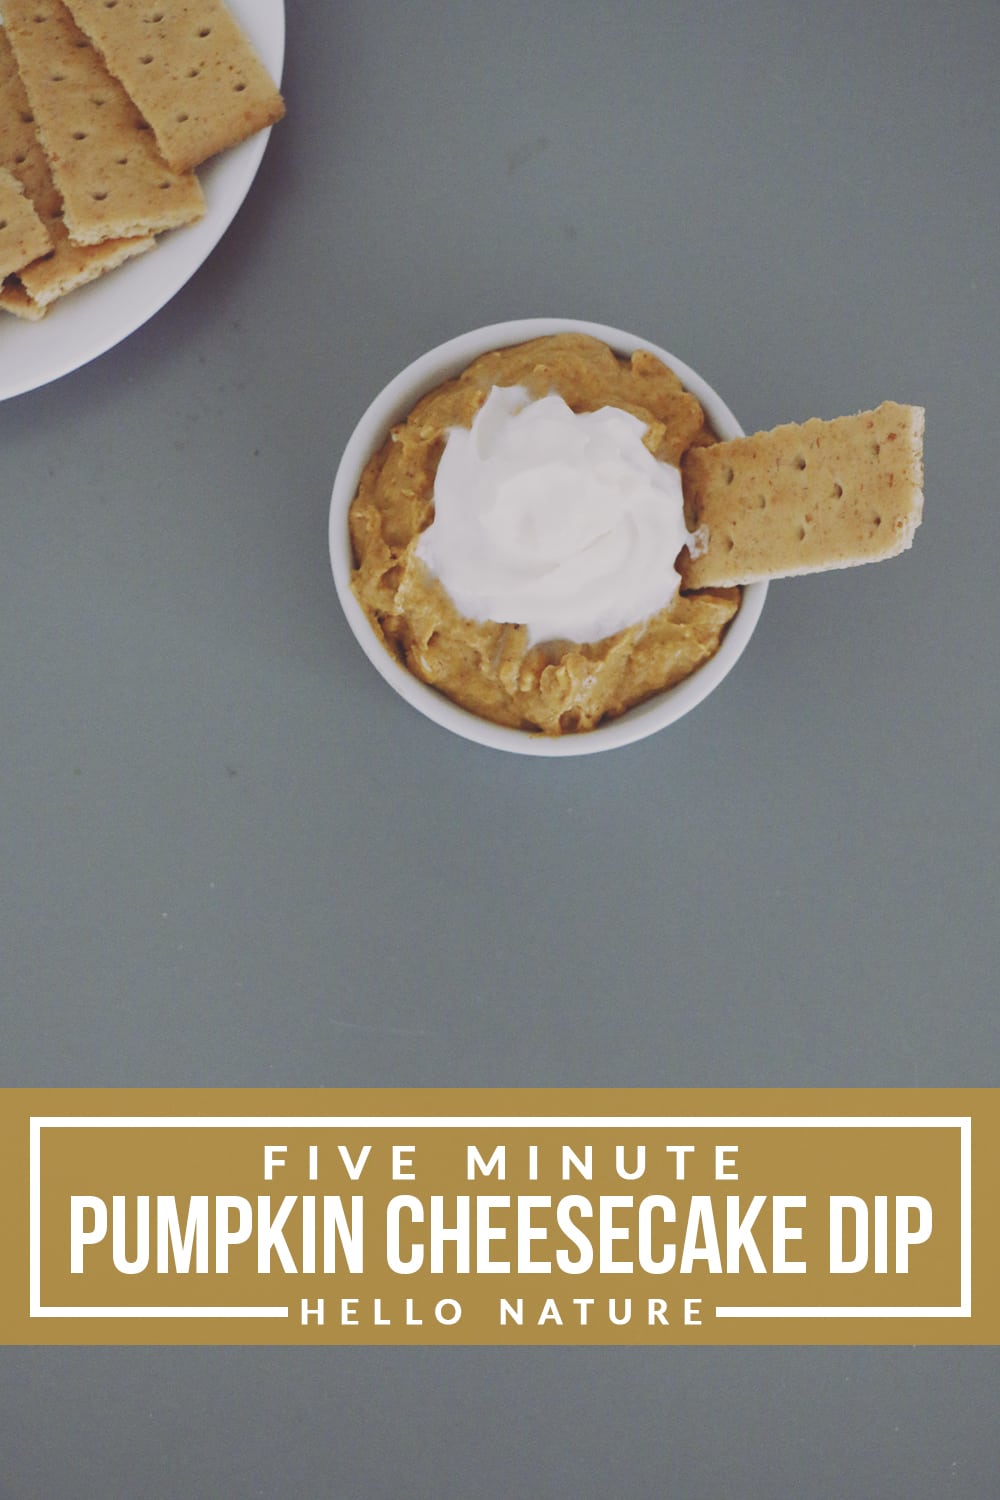 Bring something new to your autumn get-togethers! This pumpkin cheesecake dip is sure to be a huge hit for the whole family!